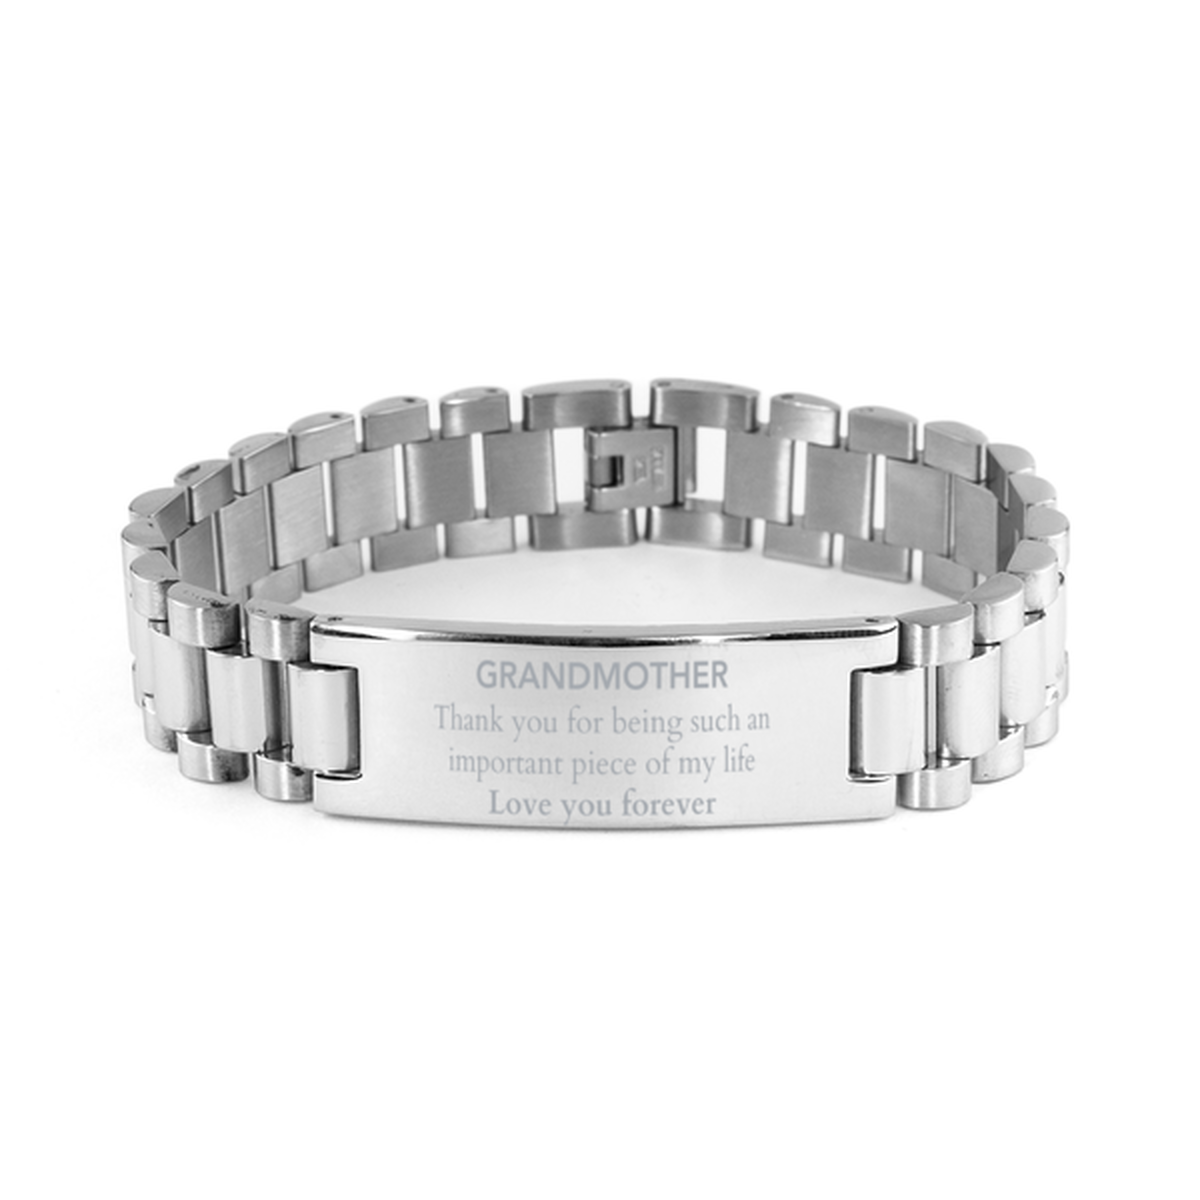 Appropriate Grandmother Ladder Stainless Steel Bracelet Epic Birthday Gifts for Grandmother Thank you for being such an important piece of my life Grandmother Christmas Mothers Fathers Day